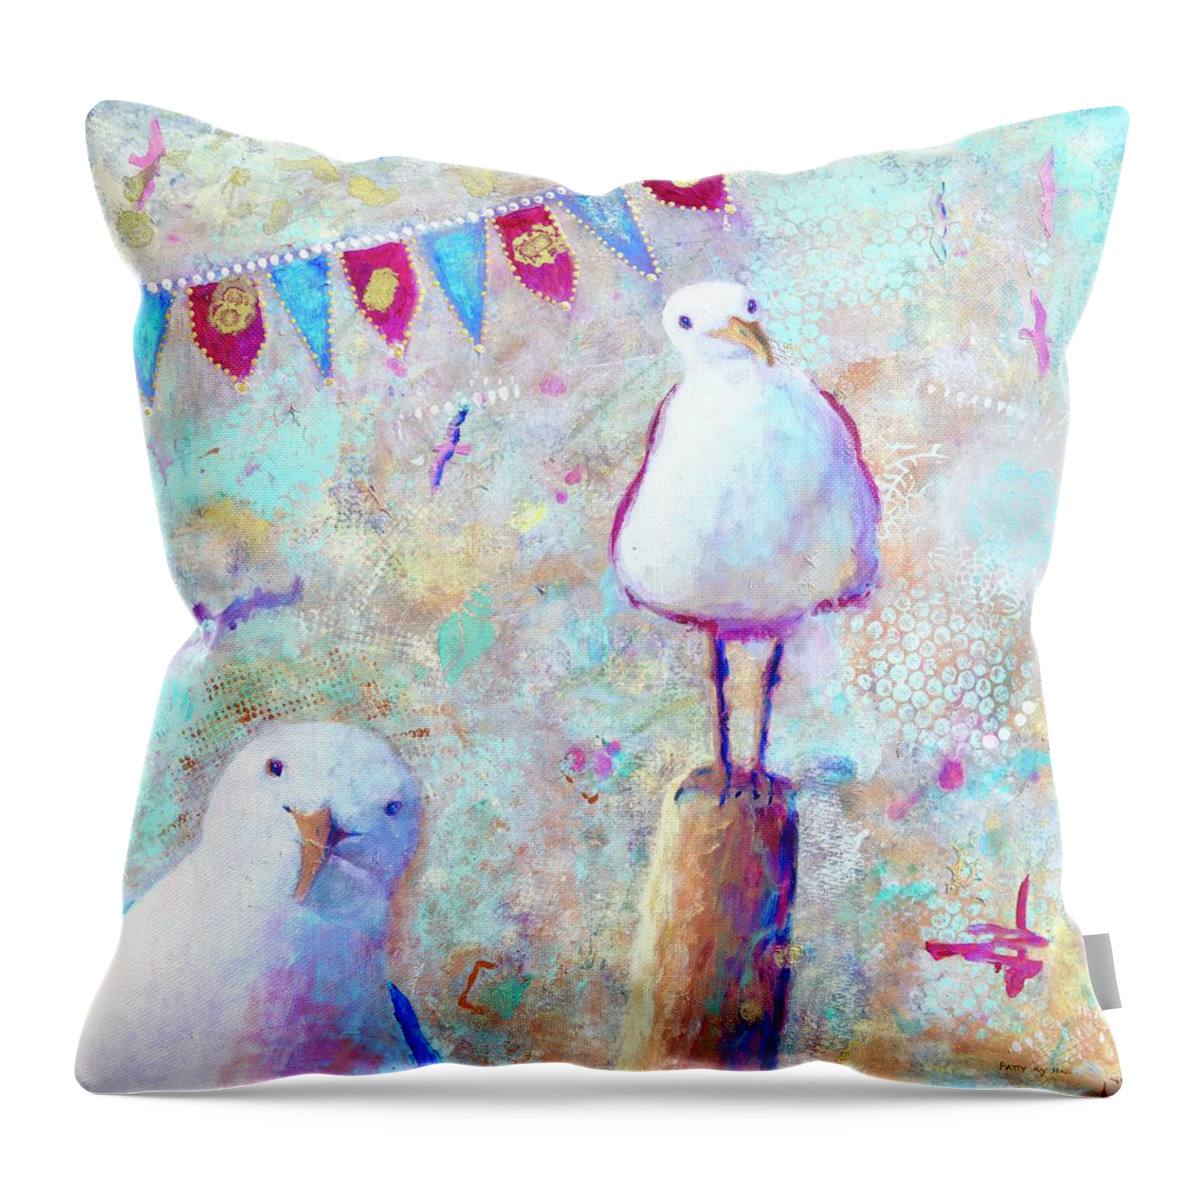 Seagulls Throw Pillow featuring the painting Whimsical Colorful Seagulls by Patty Kay Hall